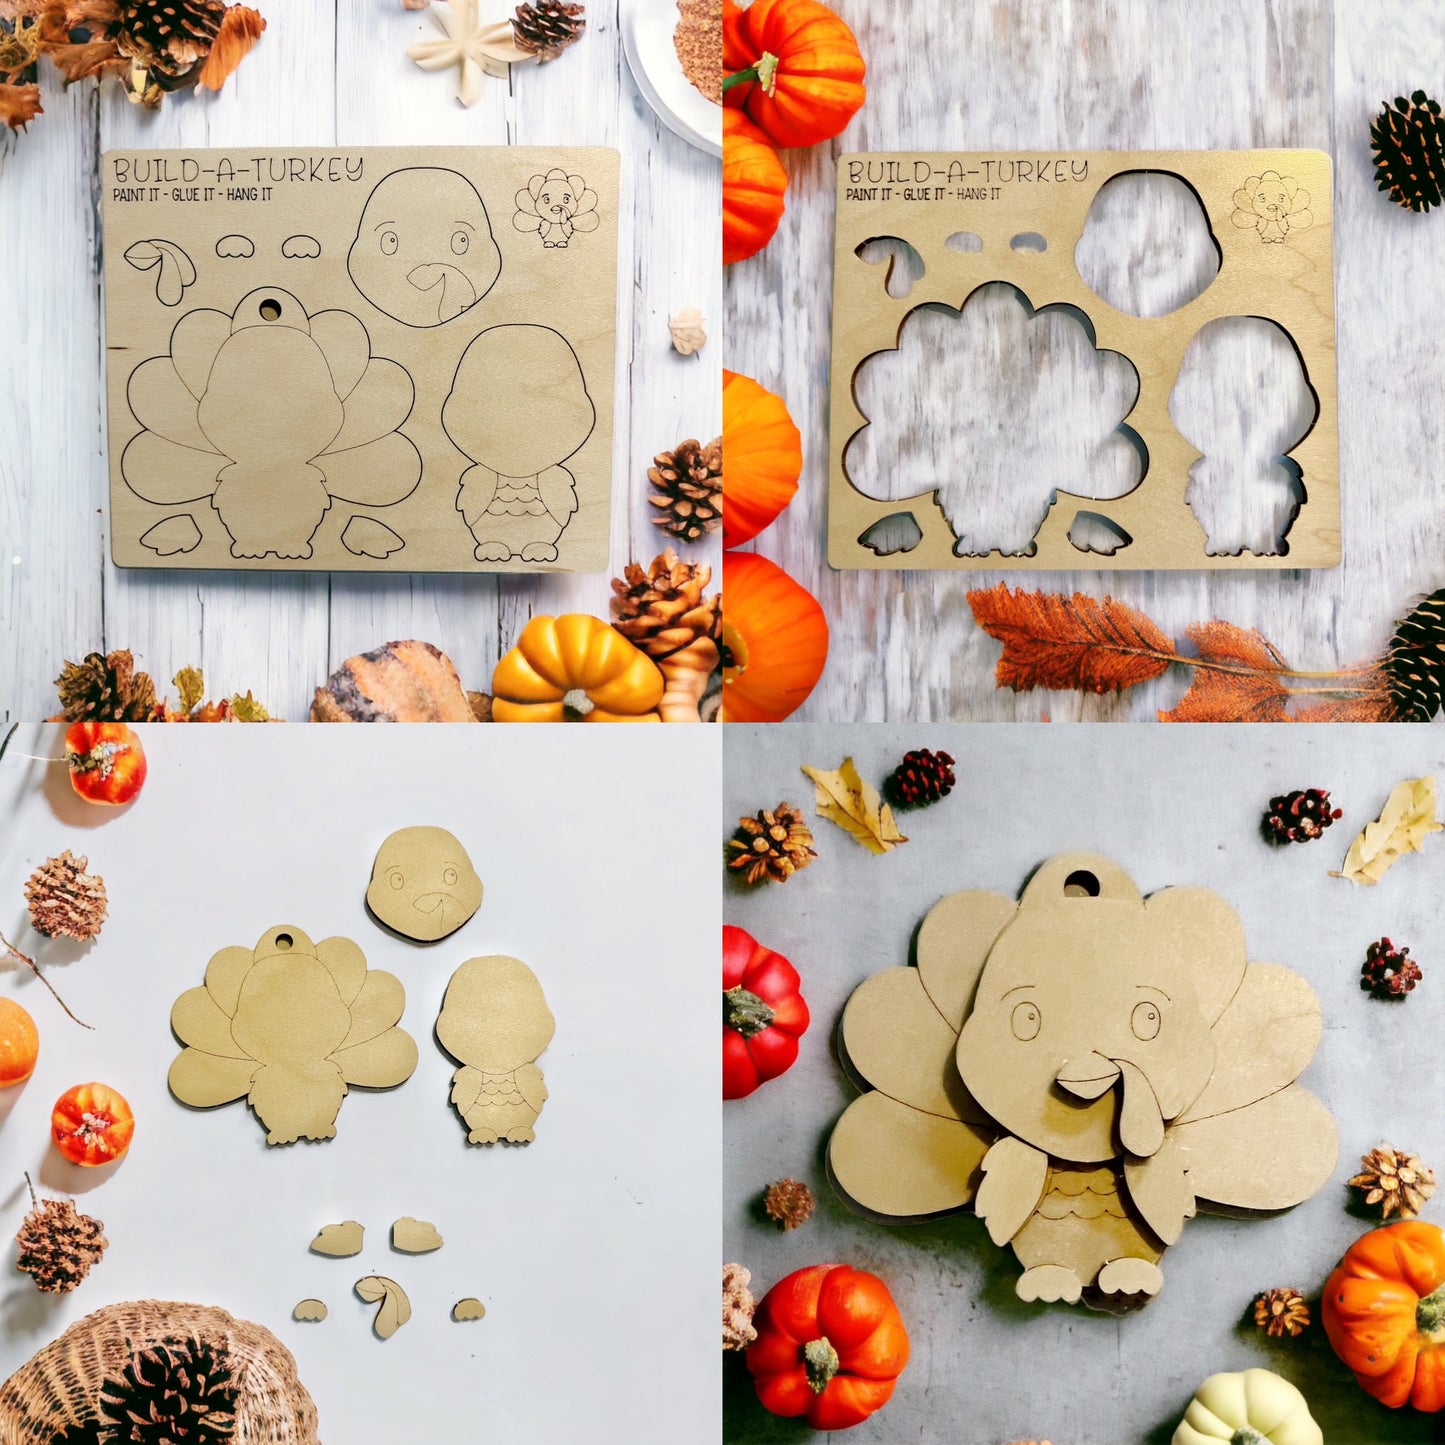 Thanksgiving DIY Craft for Kids, Turkey Ornament Pop Out Wood Craft, Wooden Paint Set Supply Art Keepsake for Holidays, Kid Toys Childs Gift